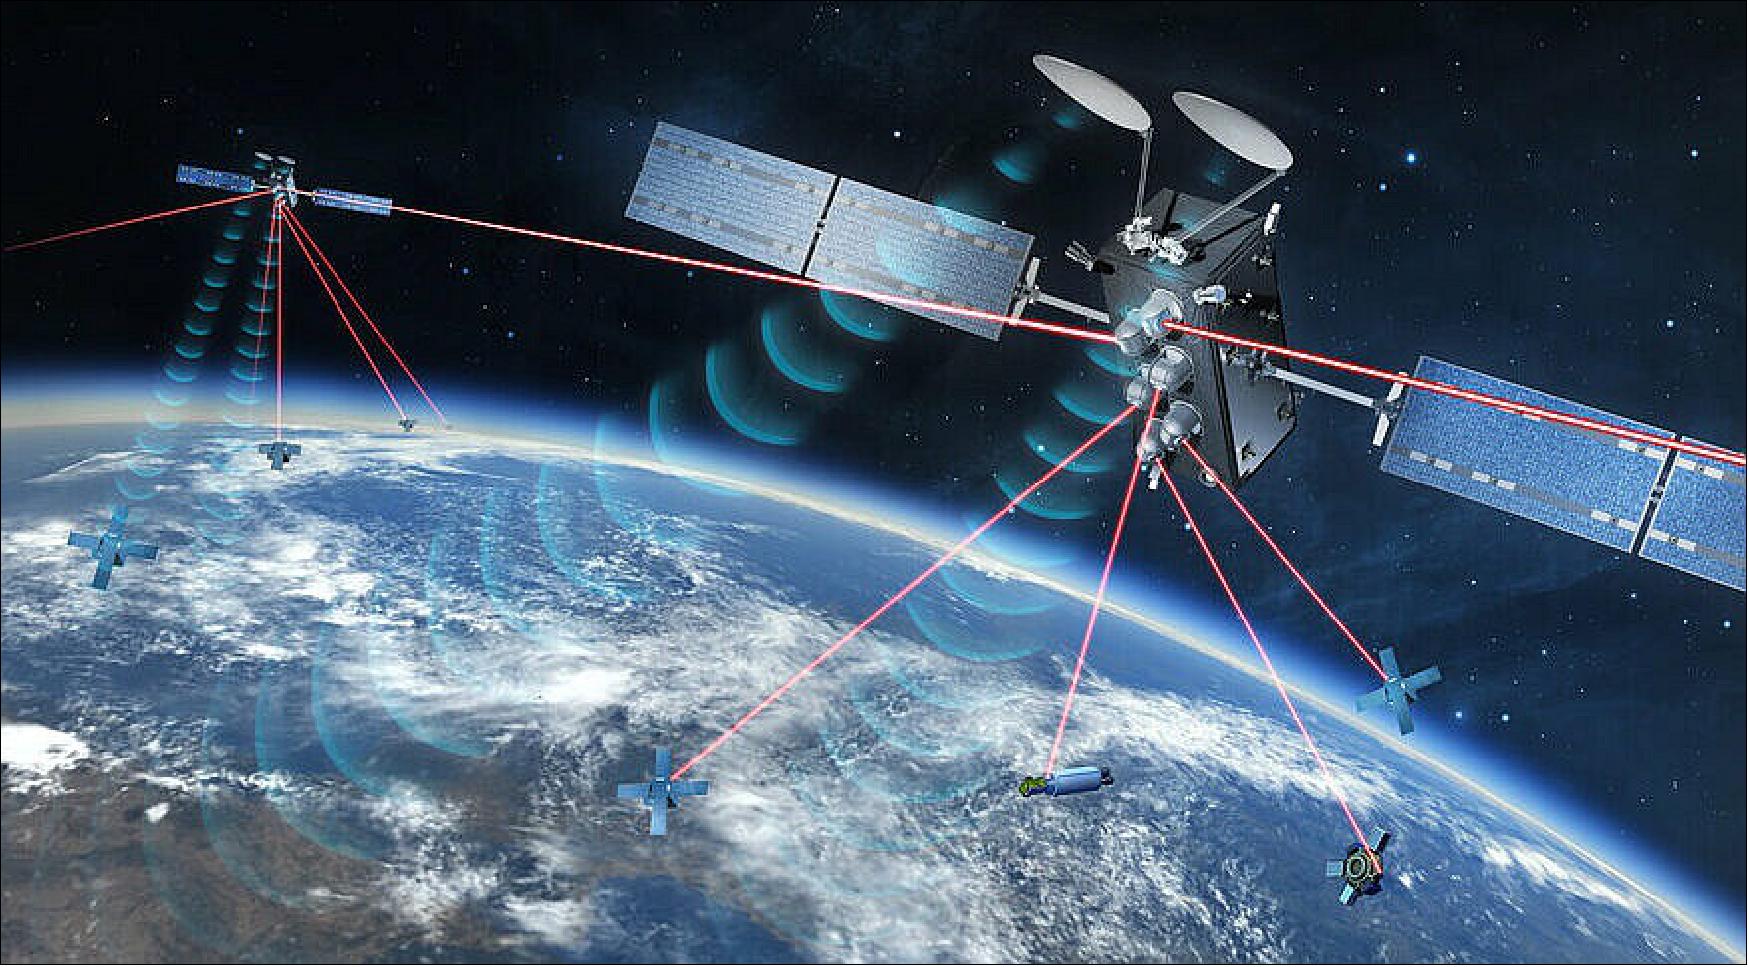 Figure 3: SpaceLink awarded OHB System AG a contract in valued at more than $300 million to manufacture four satellites for its commercial space data relay constellation (image credit: SpaceLink)